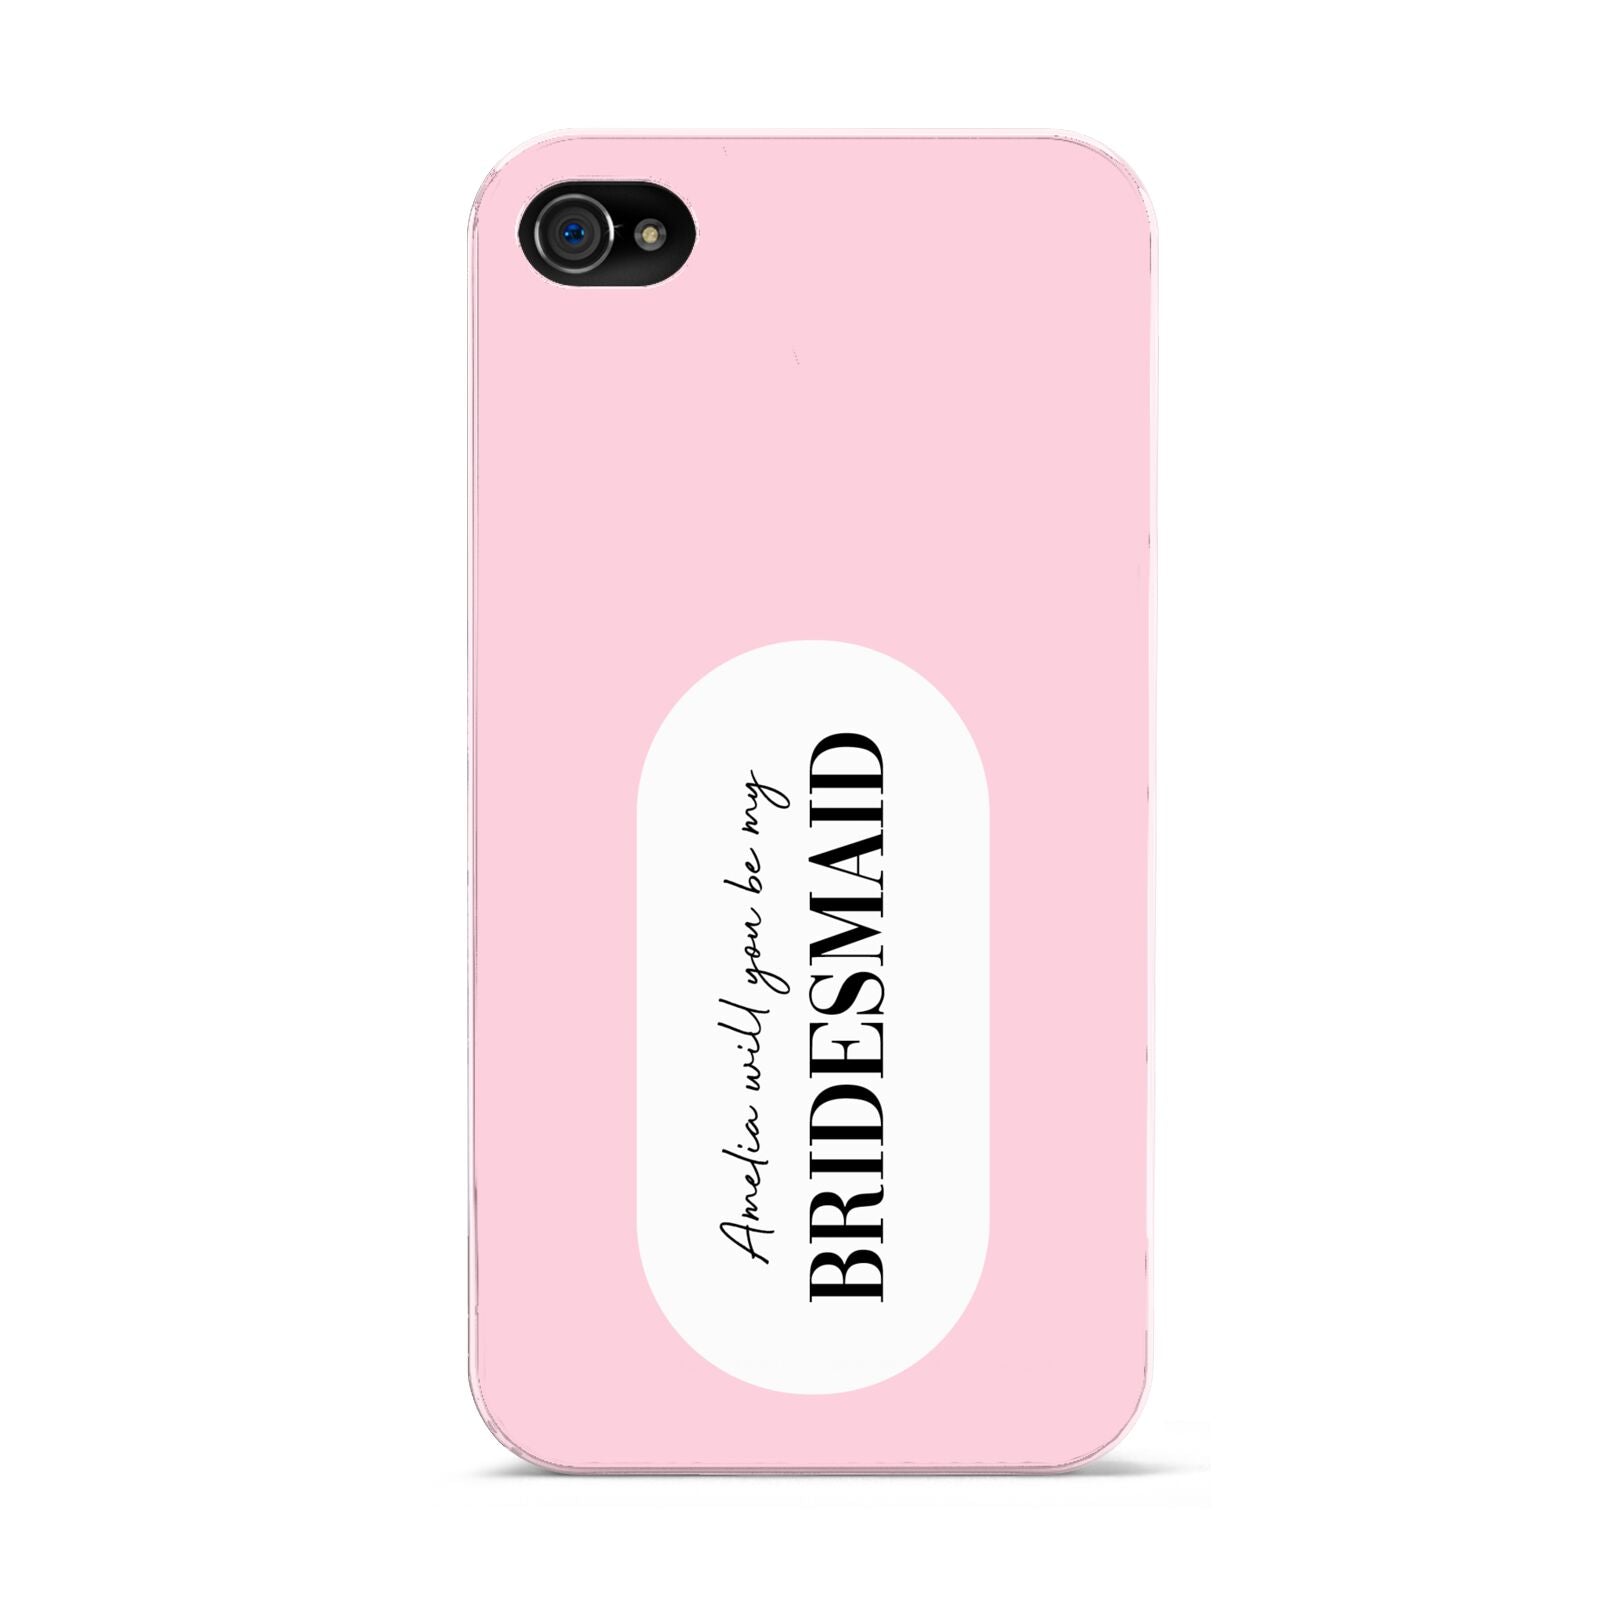 Will You Be My Bridesmaid Apple iPhone 4s Case